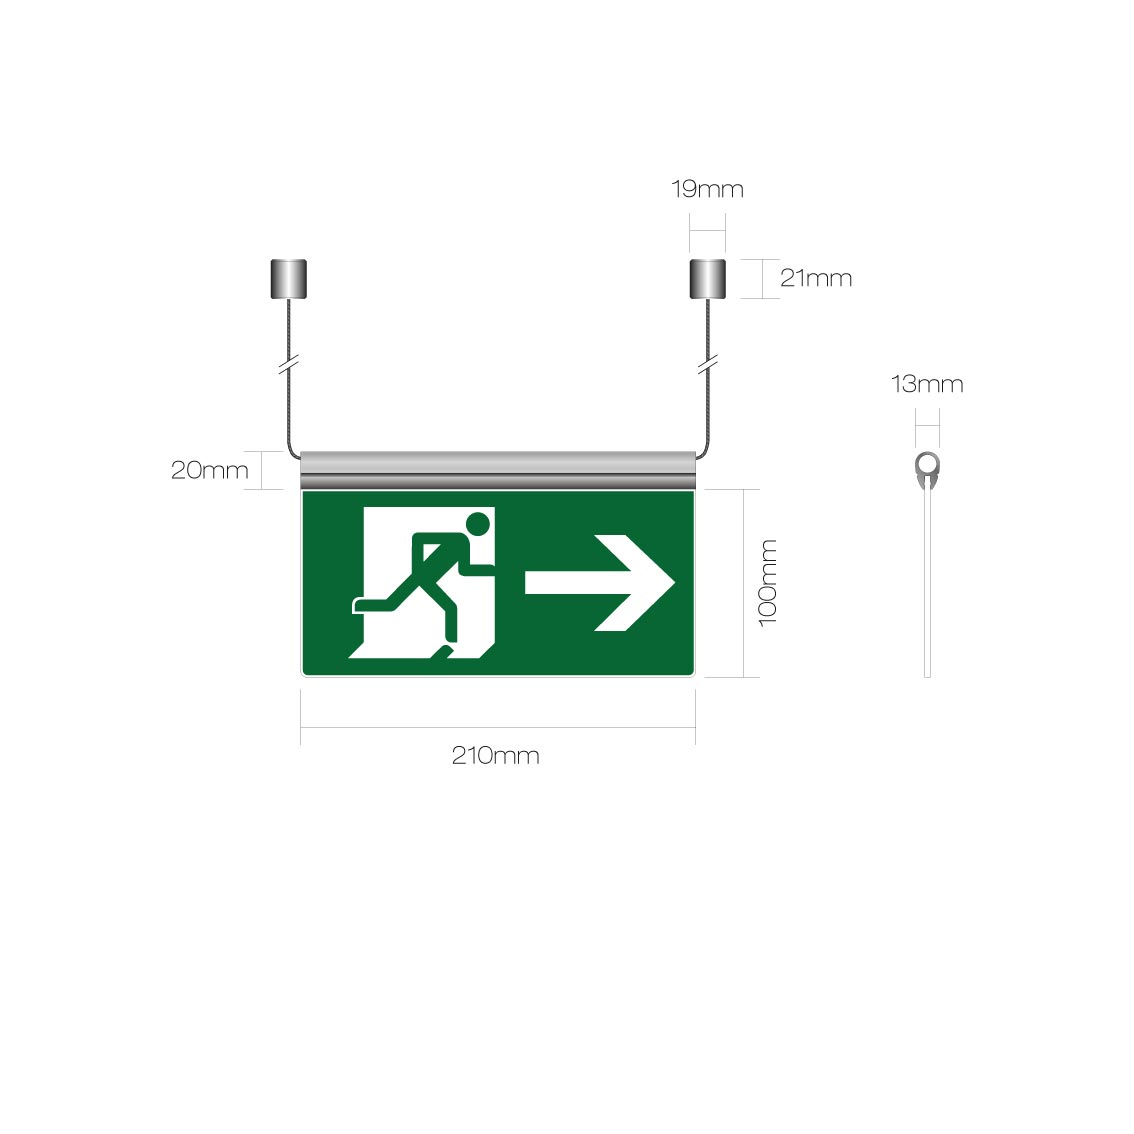 Ceiling suspended blade fire exit sign